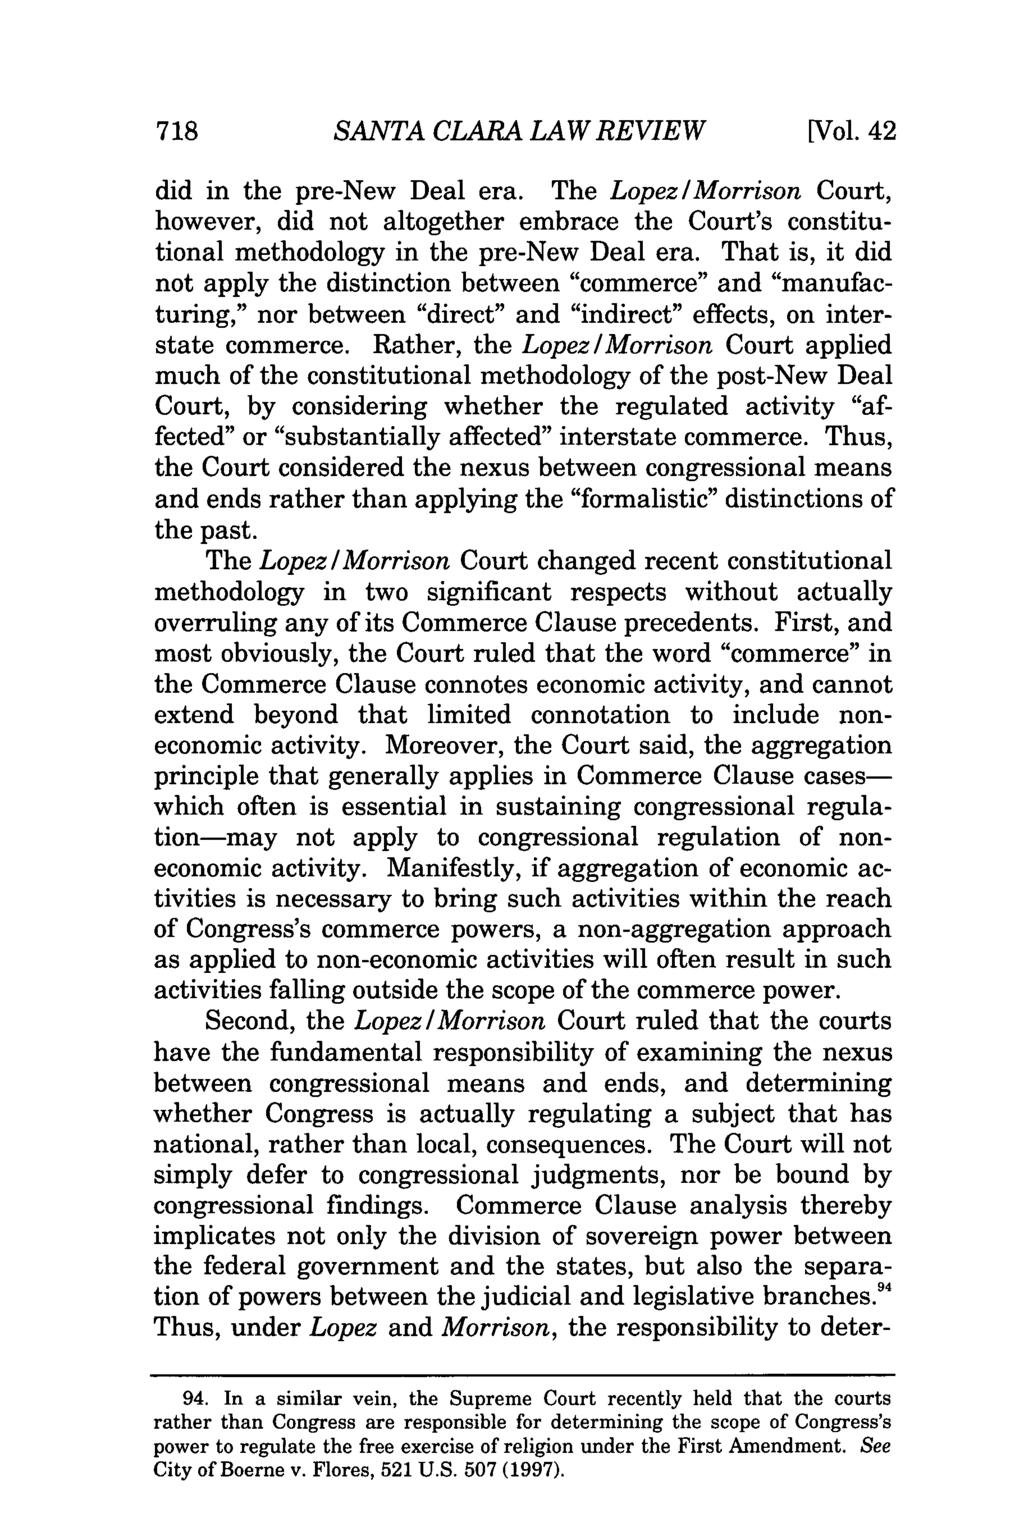 SANTA CLARA LAW REVIEW [Vol. 42 did in the pre-new Deal era. The Lopez/Morrison Court, however, did not altogether embrace the Court's constitutional methodology in the pre-new Deal era.